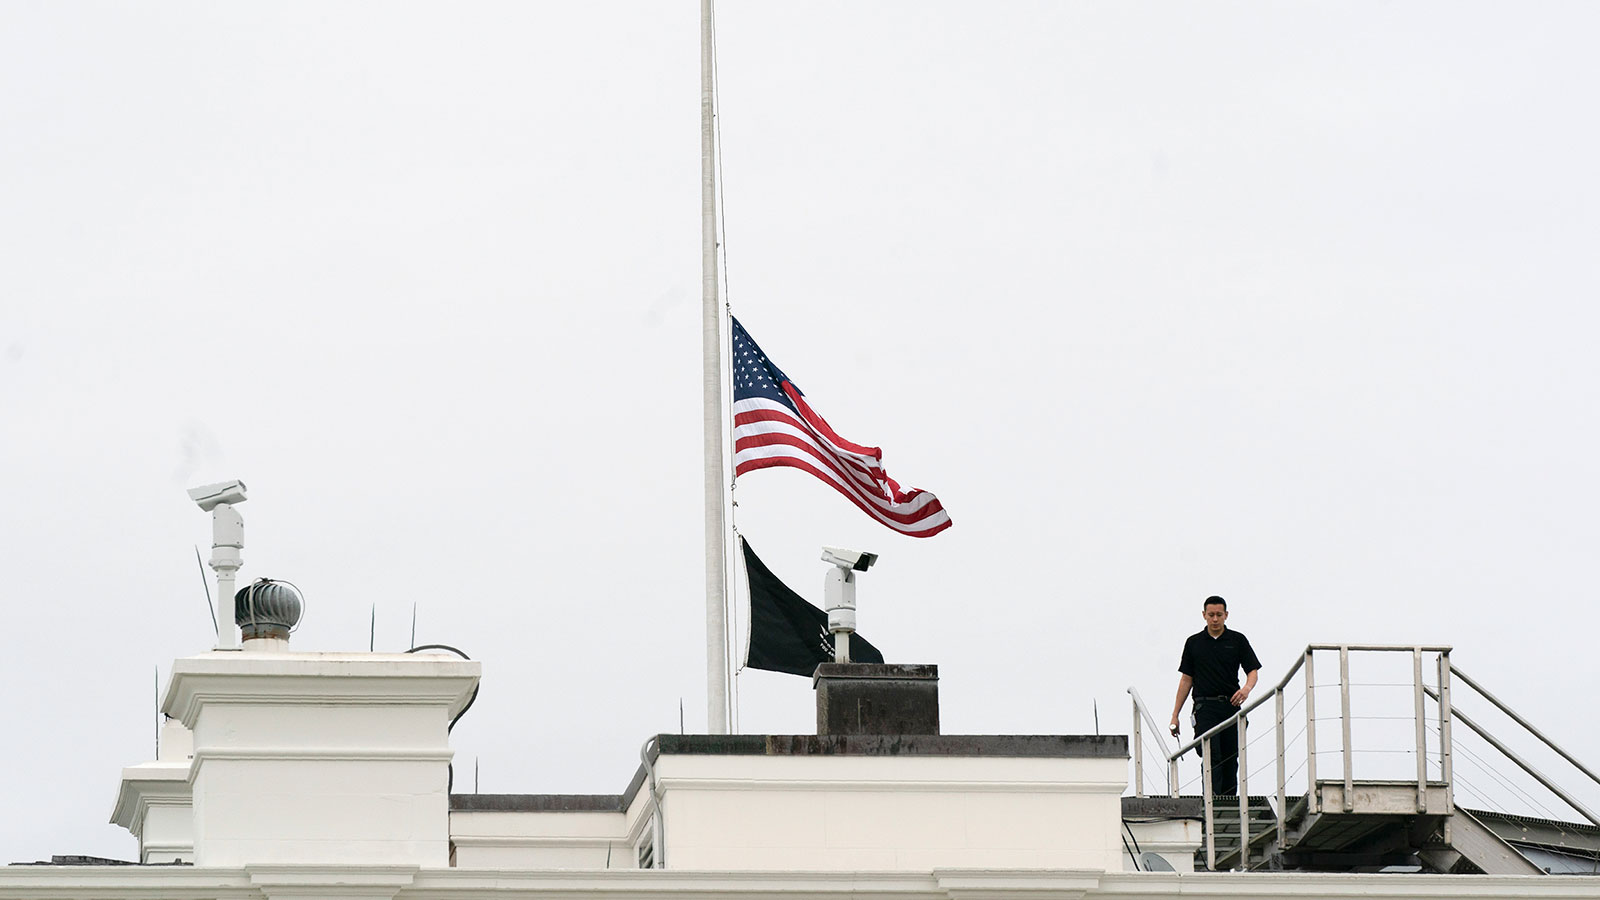 An American flag flies at half-staff at the White House on May 24, in Washington, DC.